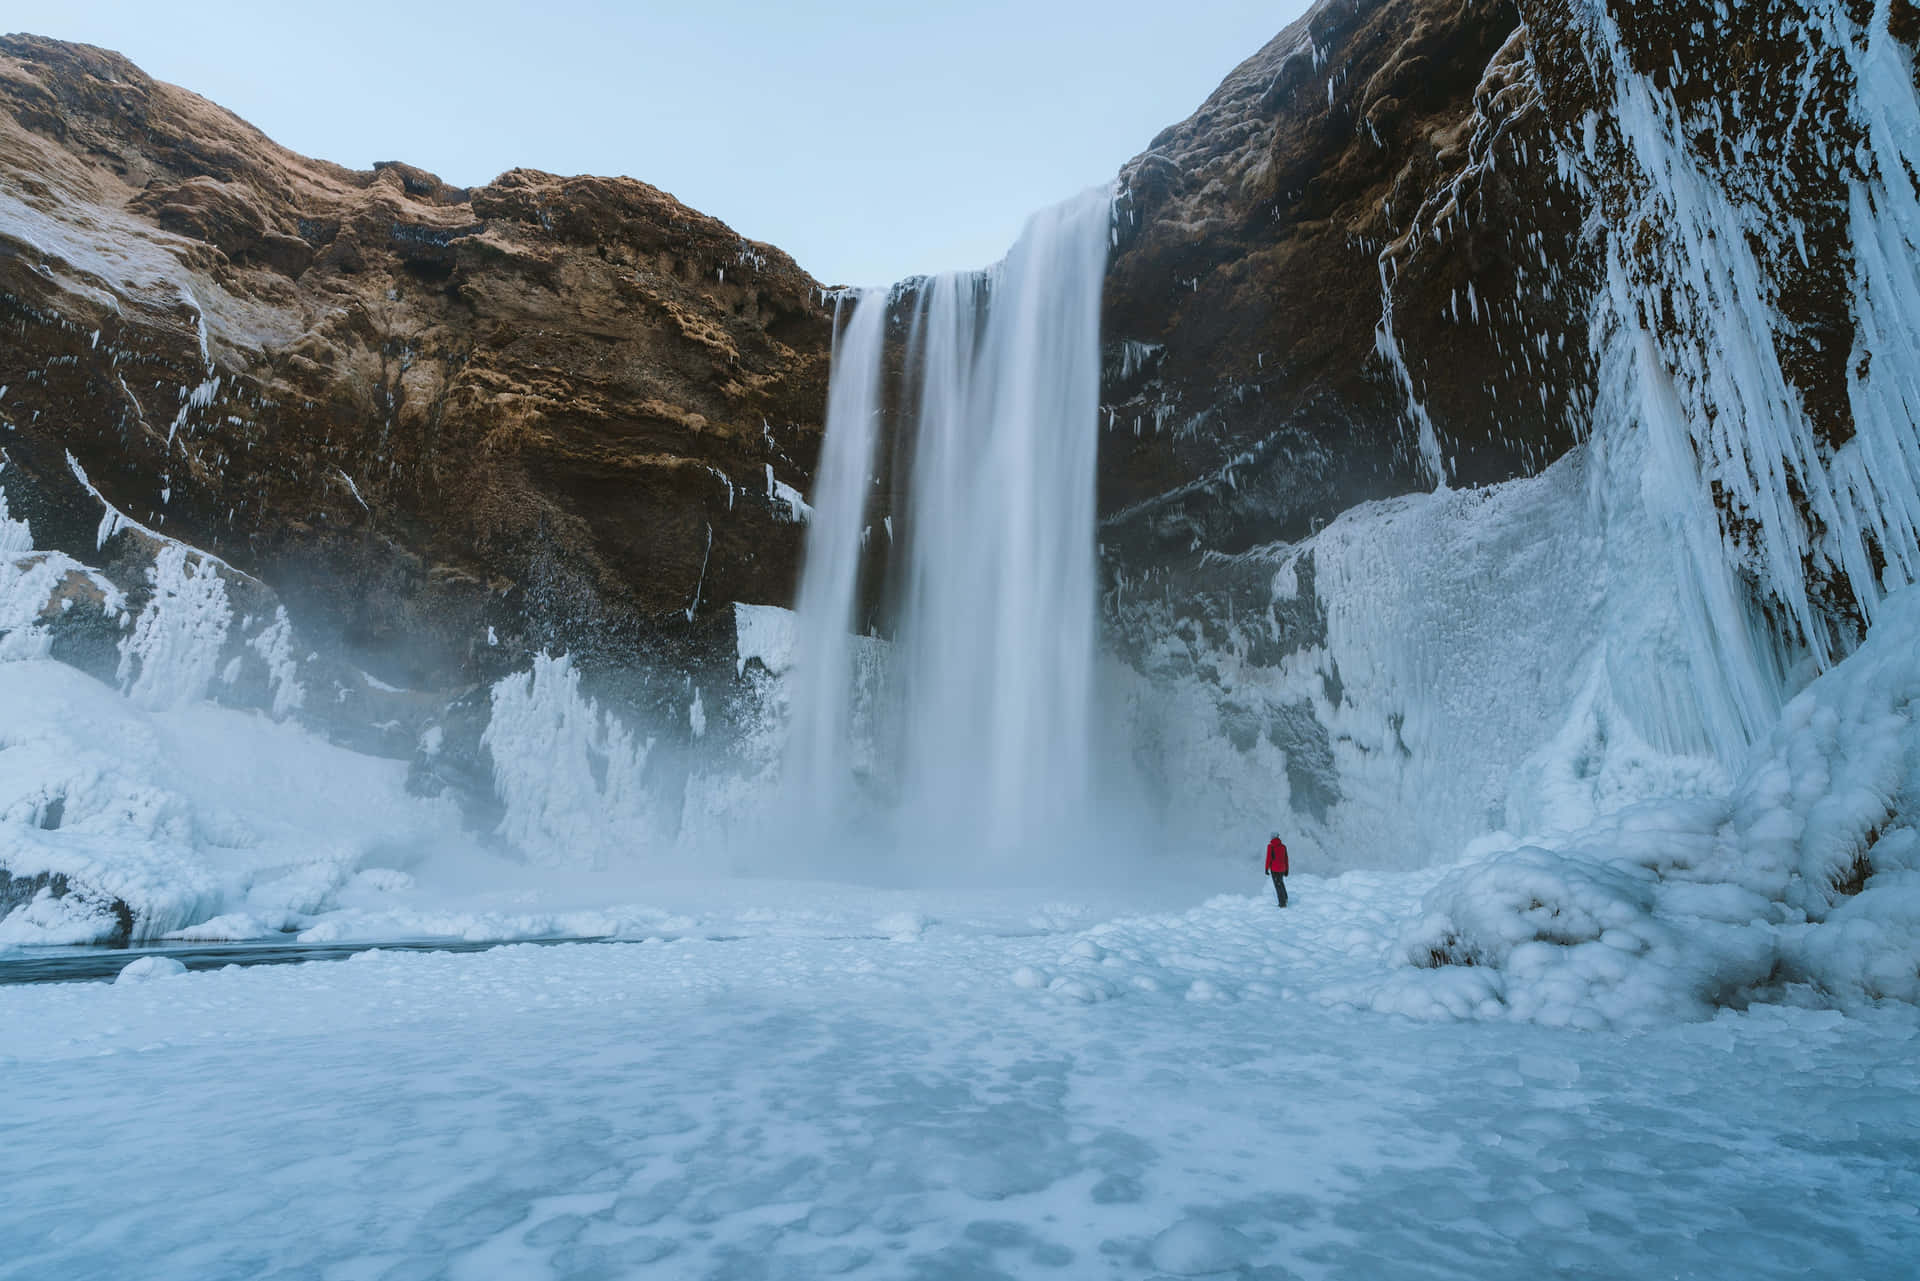 Explore the rugged beauty of Iceland